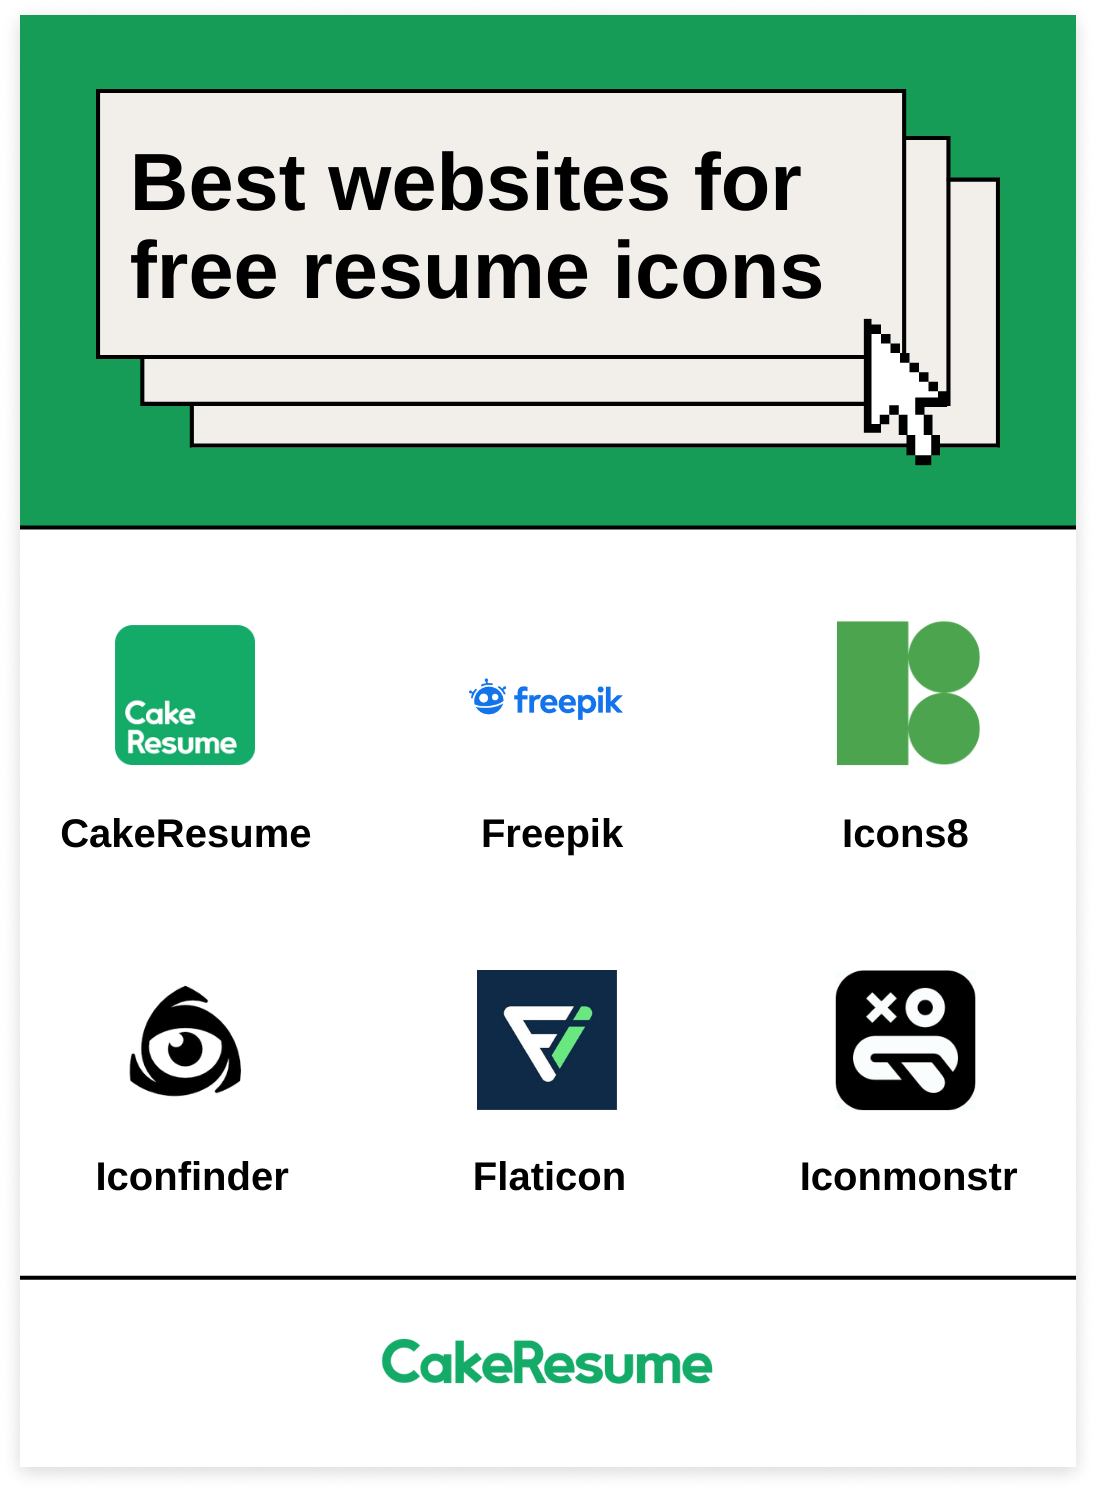 Website for Free Resume Icons